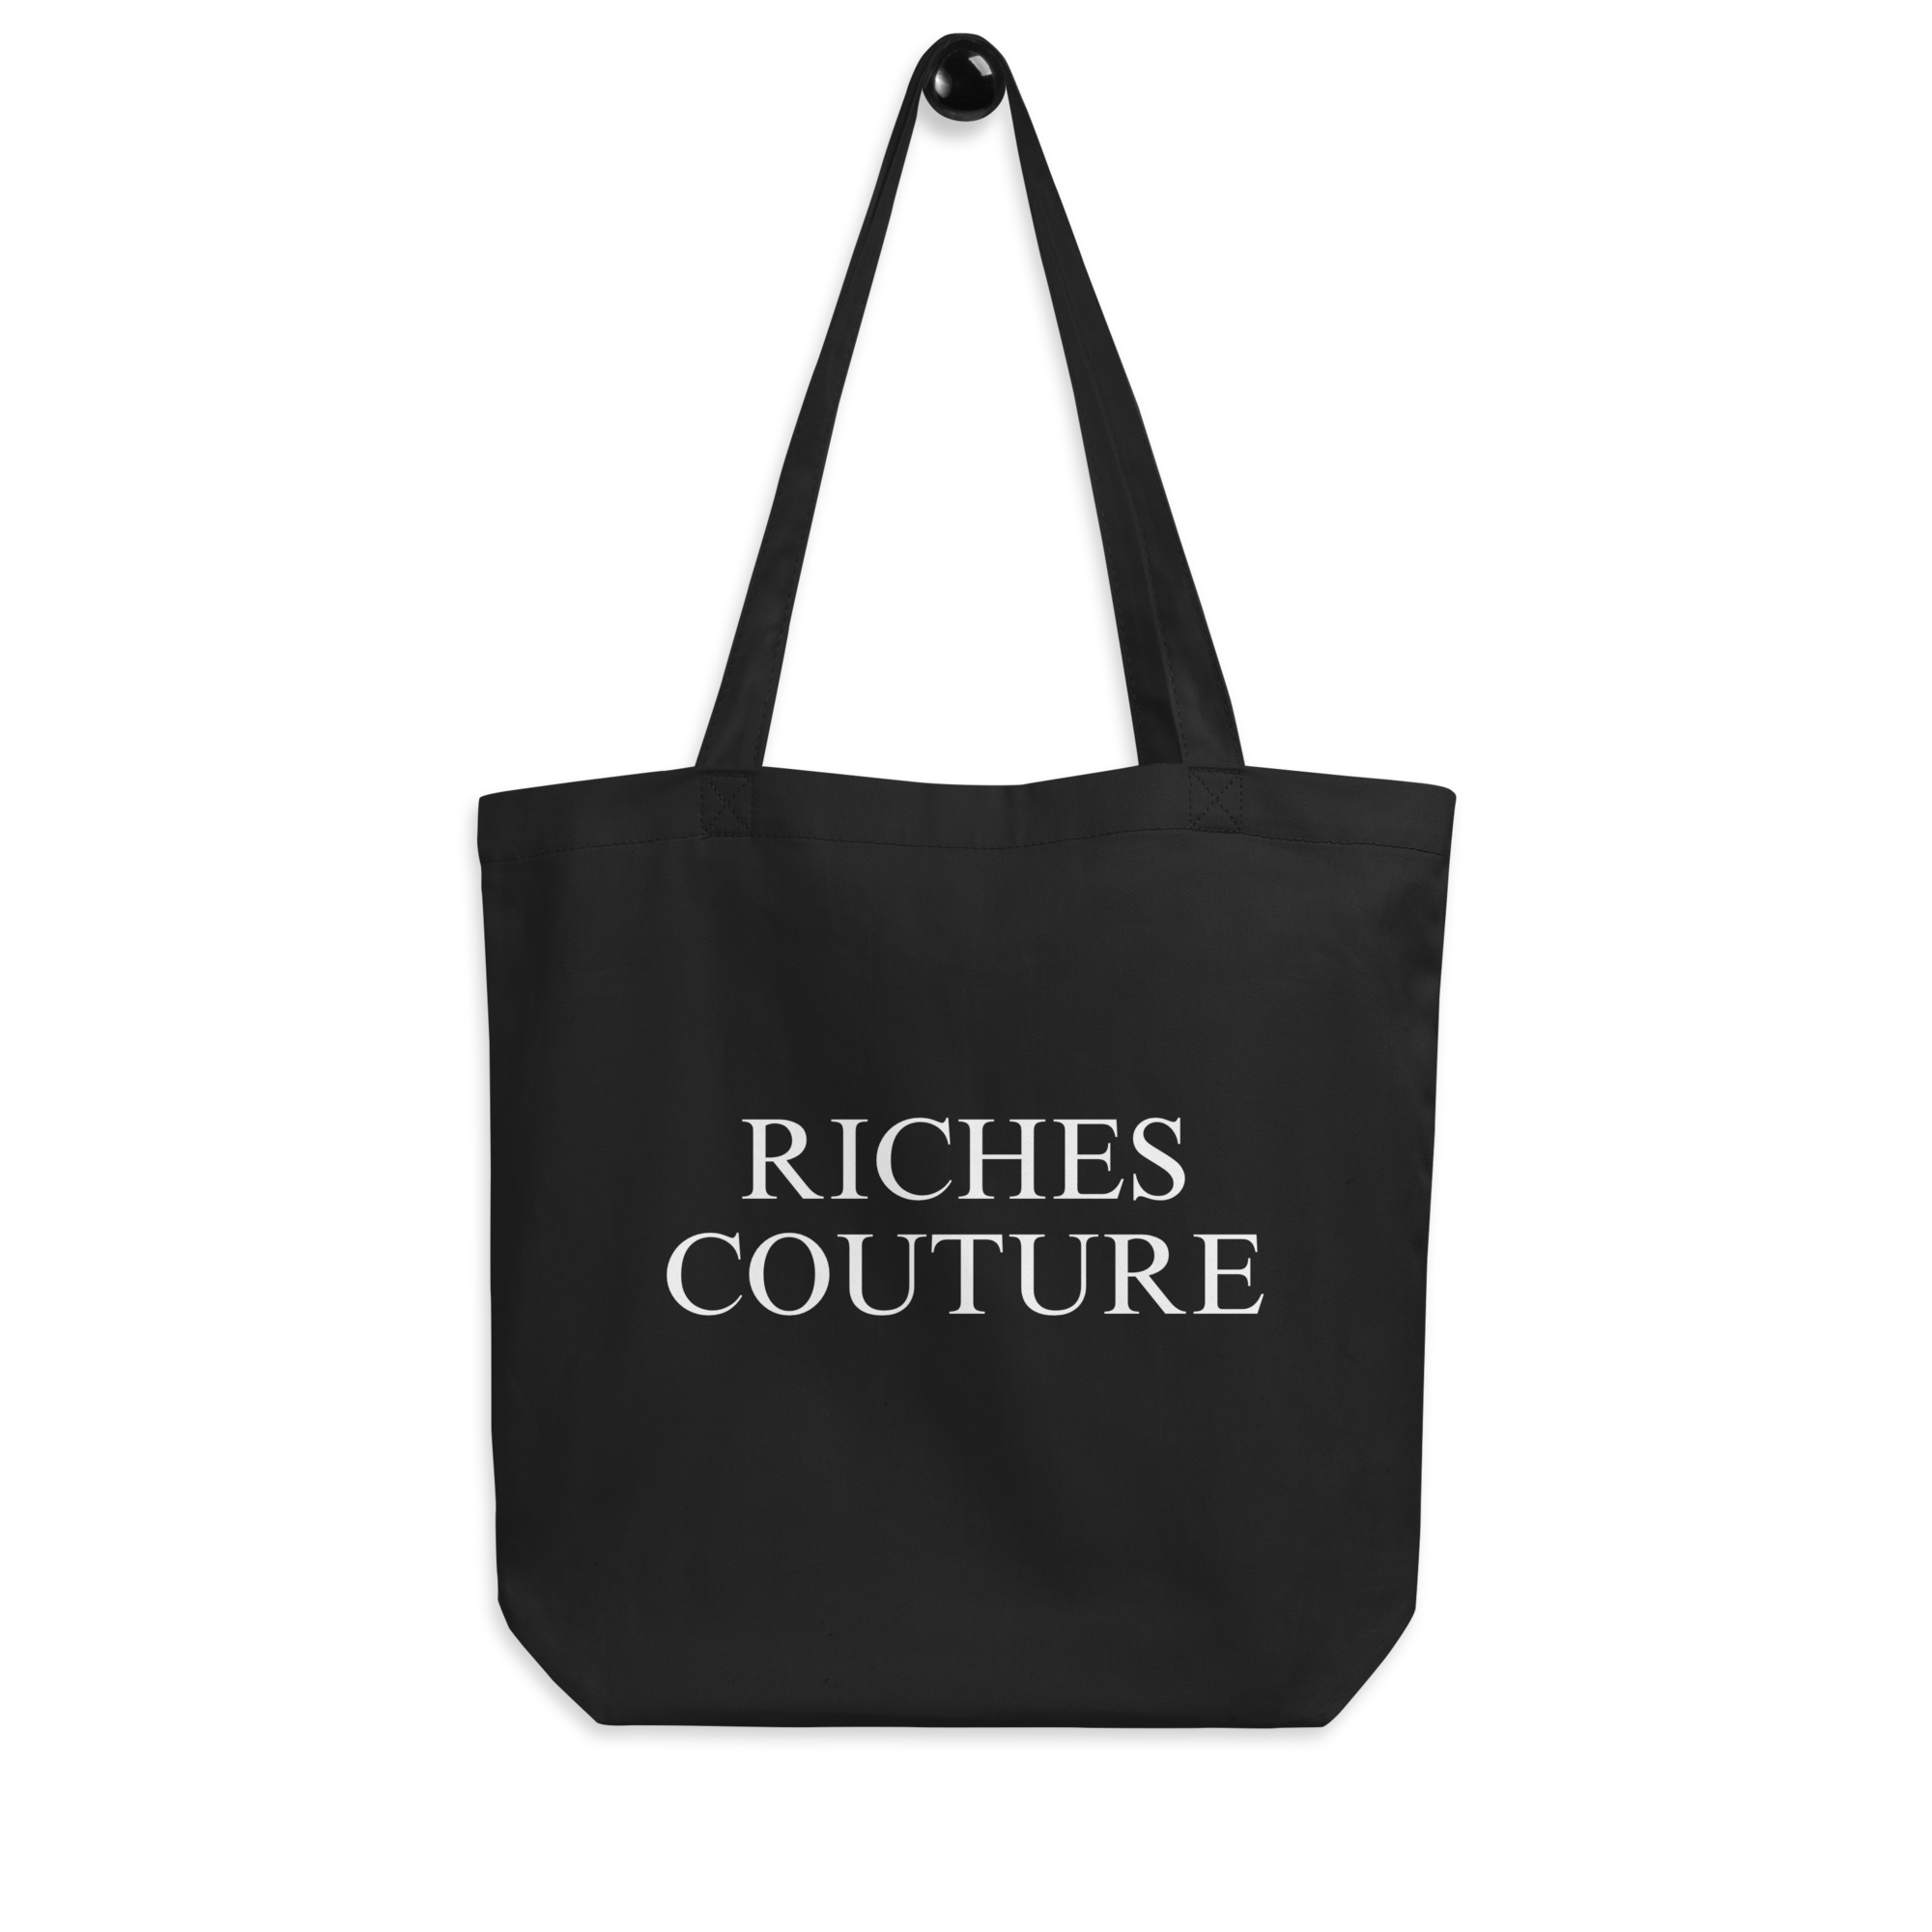 Earth Friendly Tote Bag - Signature Noir Collection